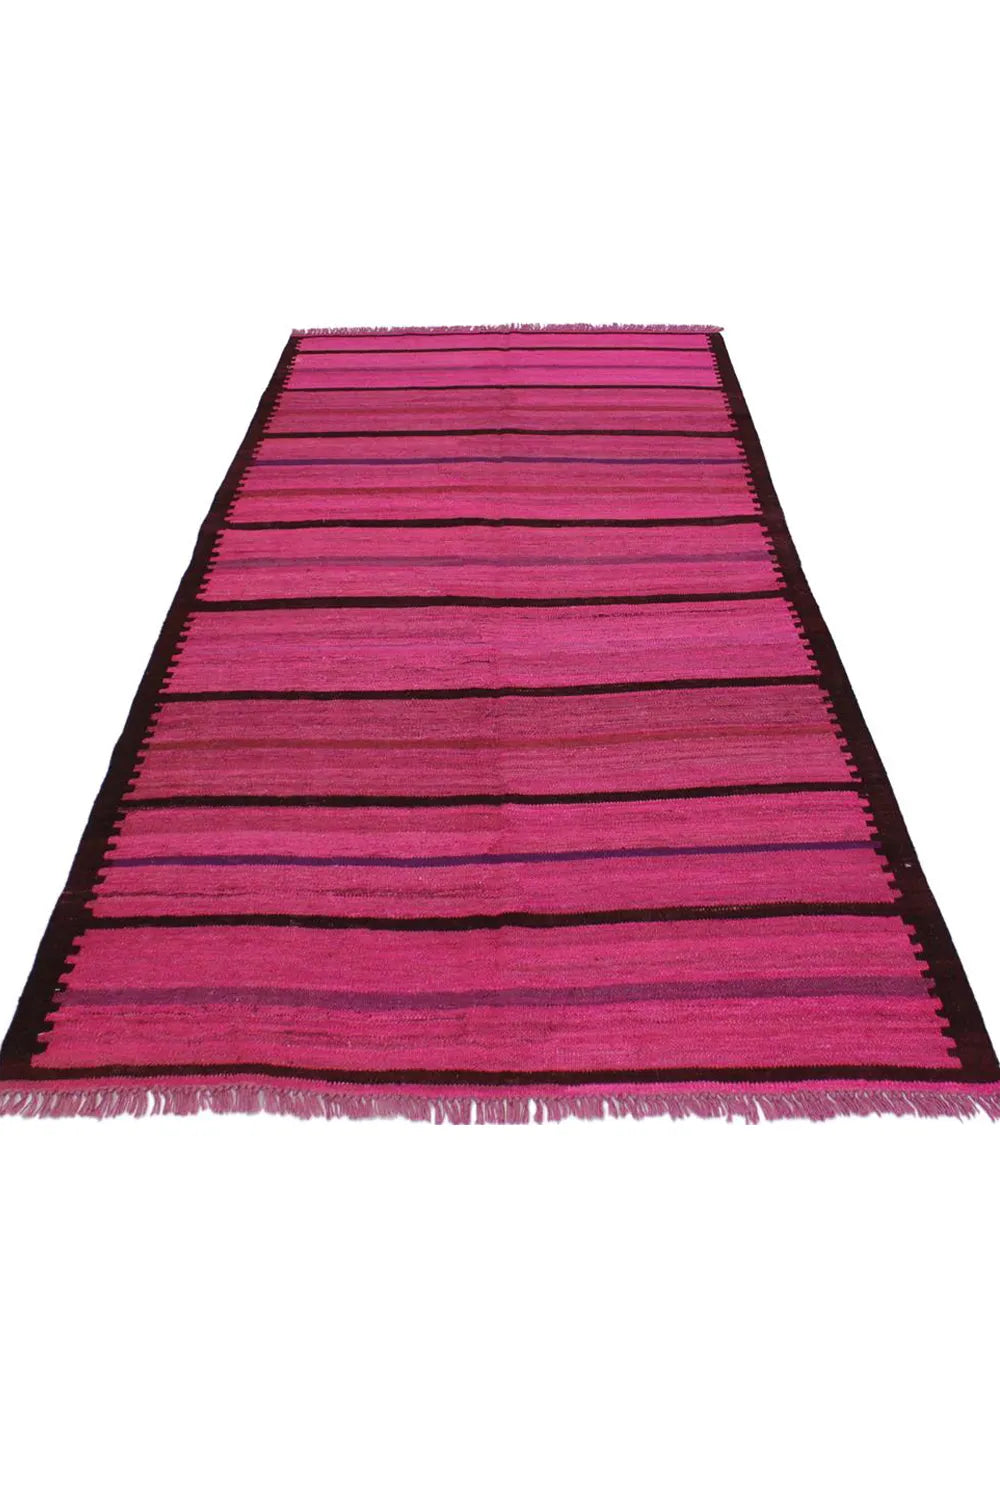 Double-Sided Reversible Pink Southwestern Kilim Rug in Versatile 8x10 Size